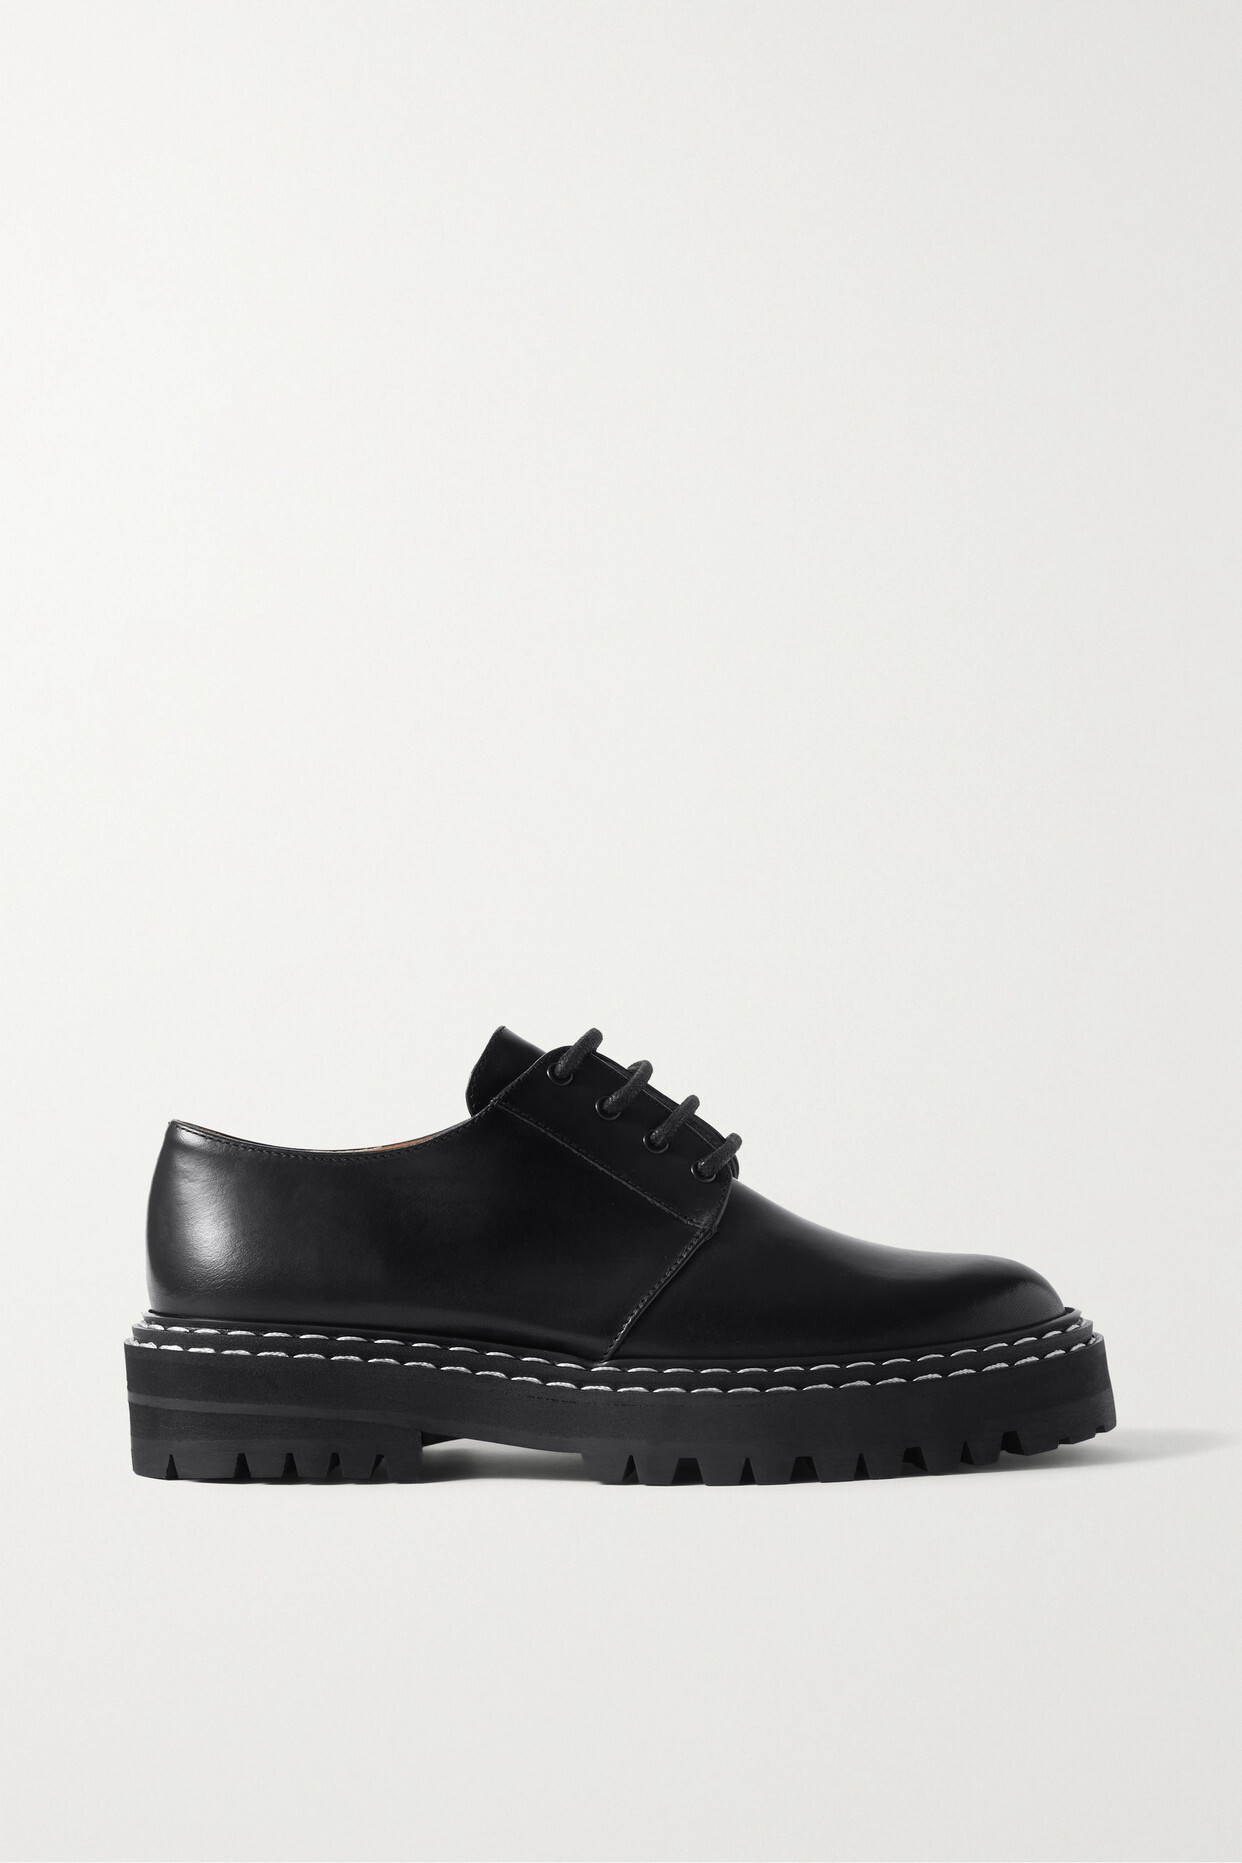 ATP Atelier - Maglie Leather Brogues - Black